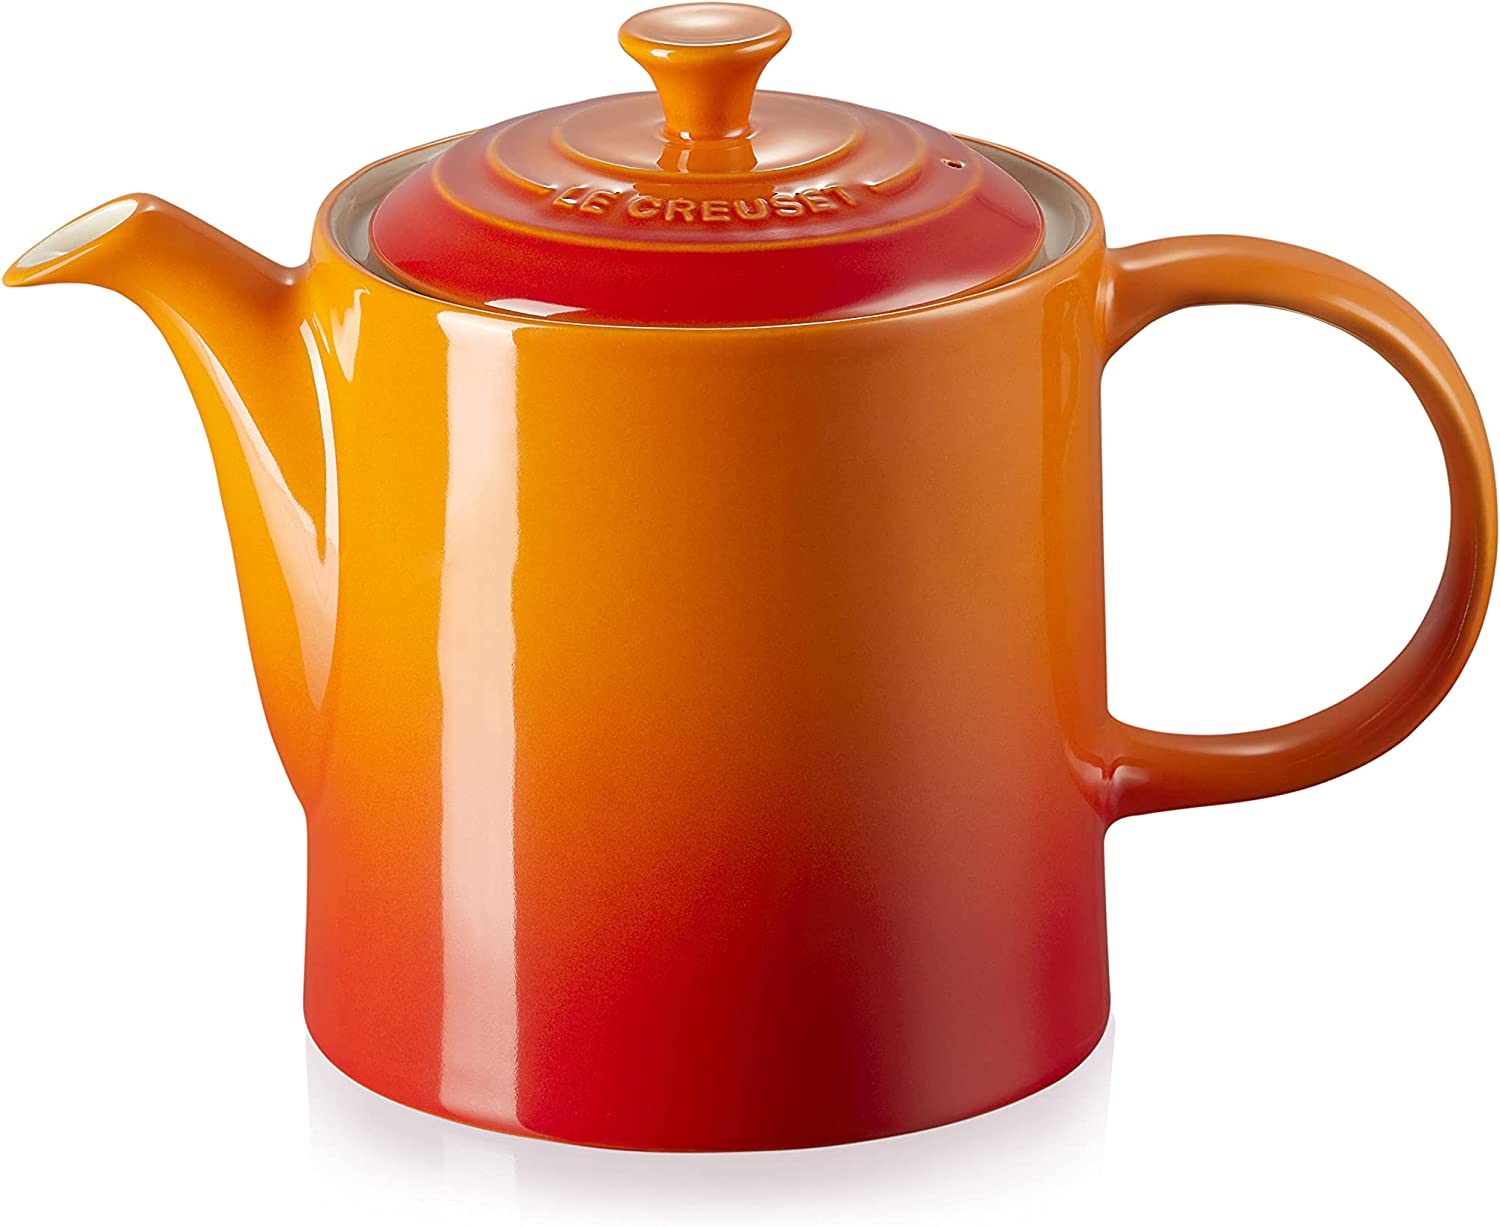 Le Creuset 8070313090003 Stoneware Teapot Oven Red